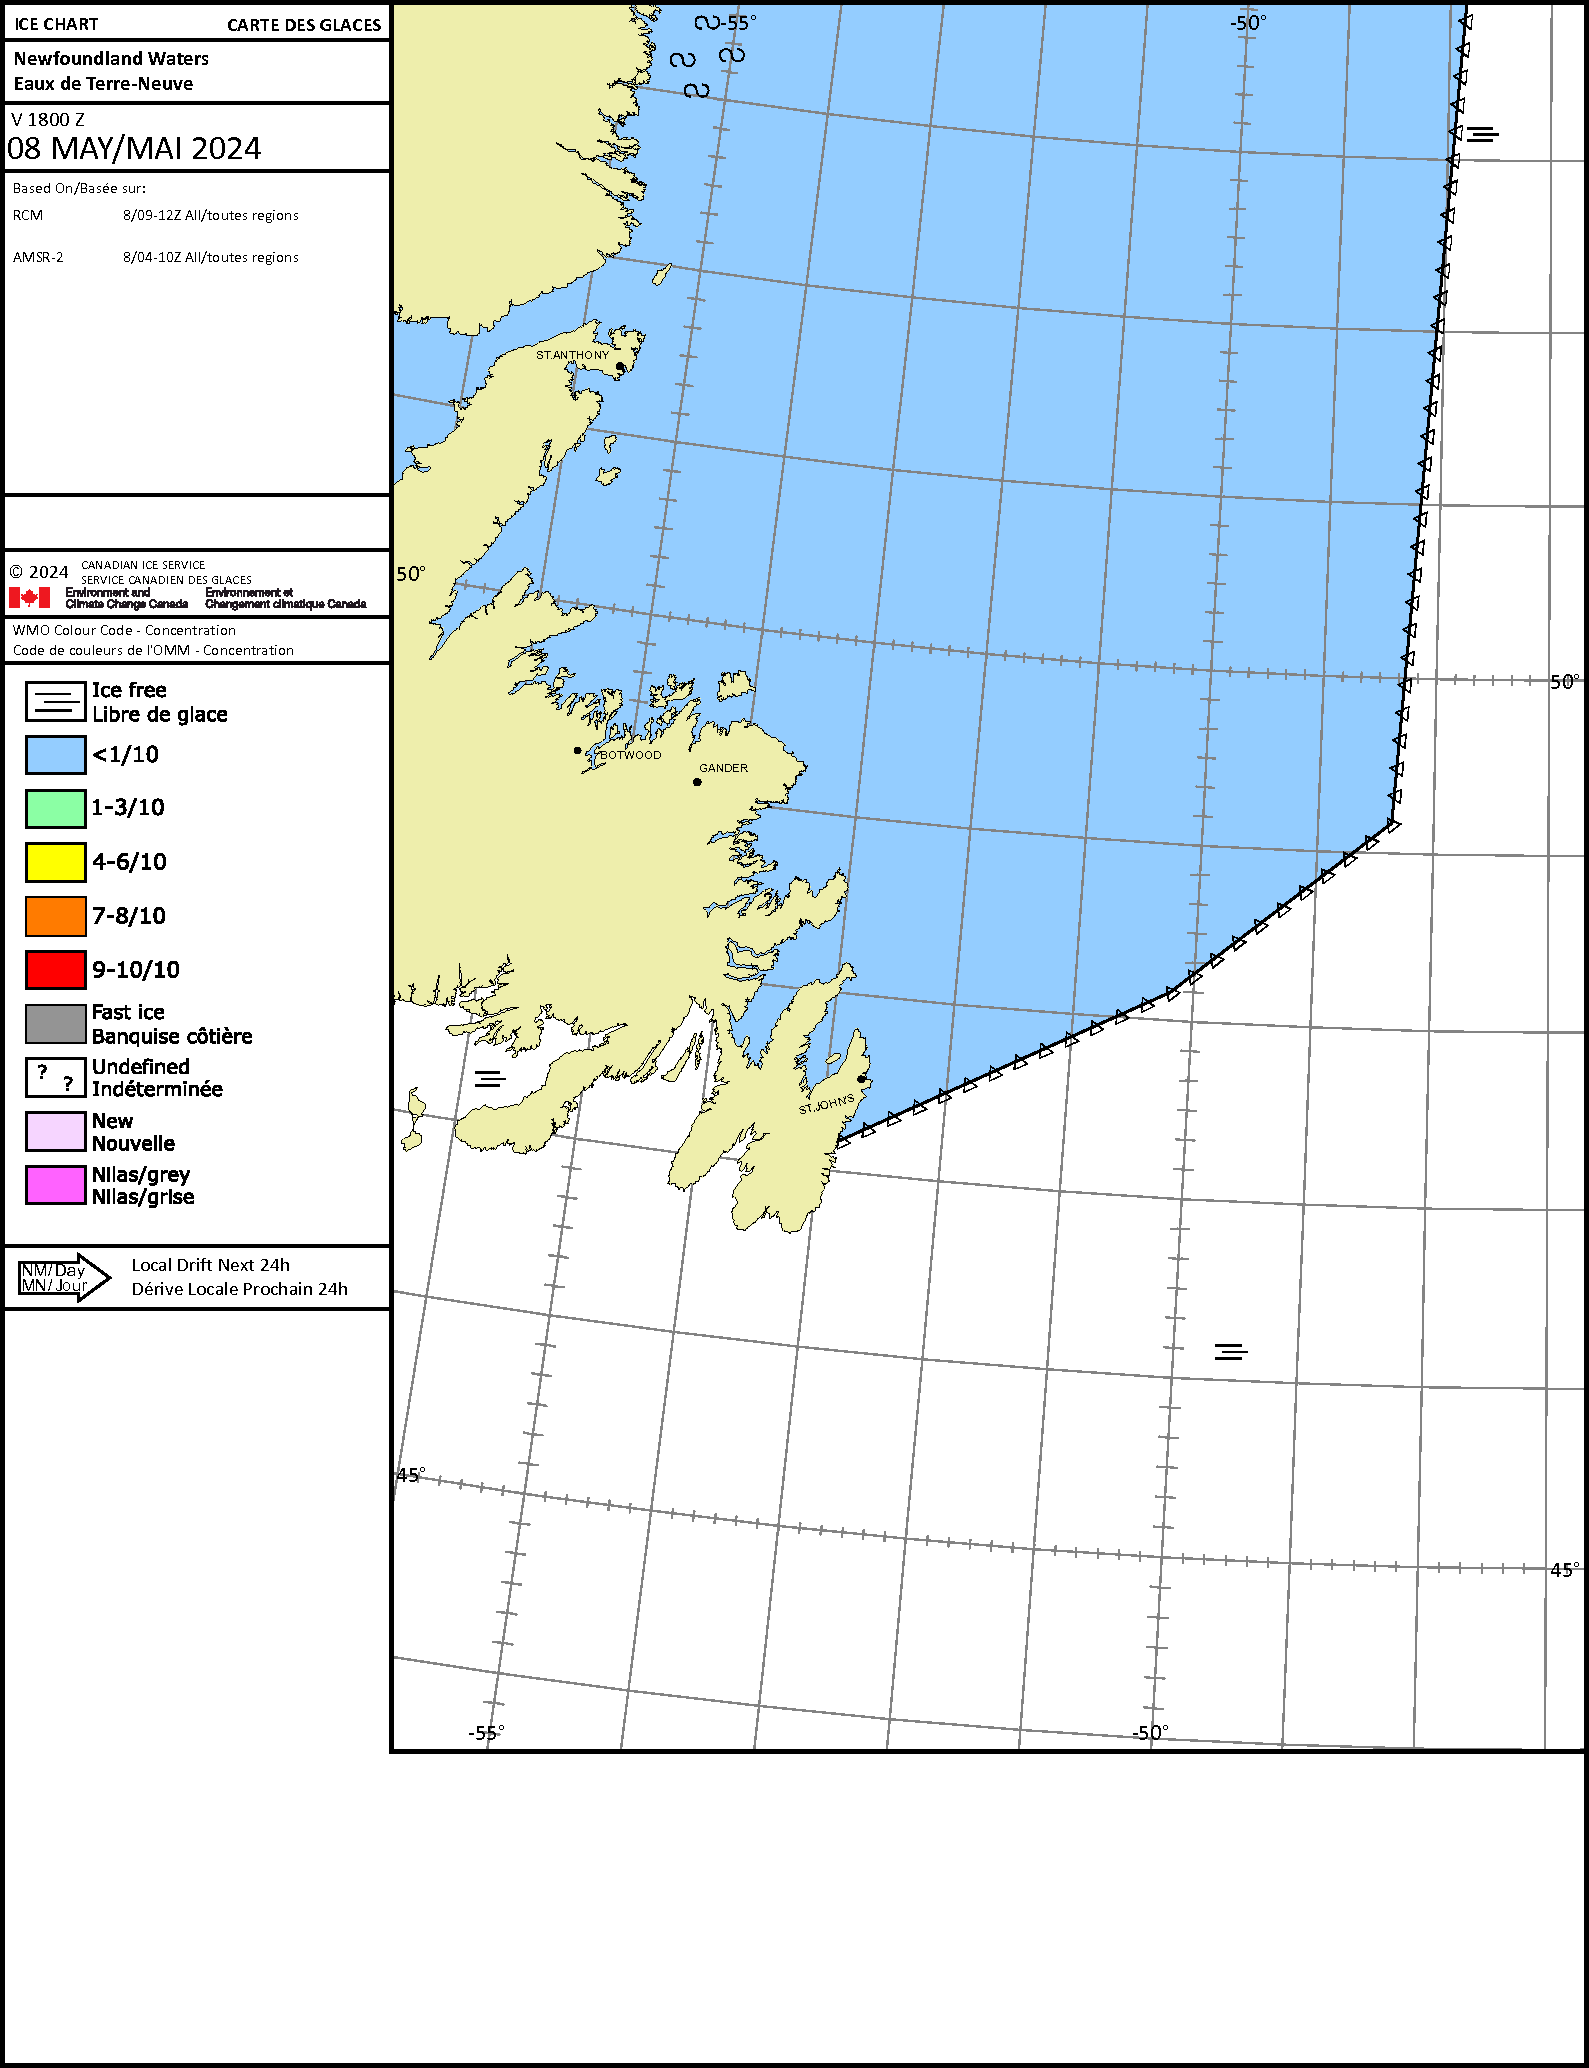 Weekly Regional Ice Chart - Concentration for East Coast (Canada)